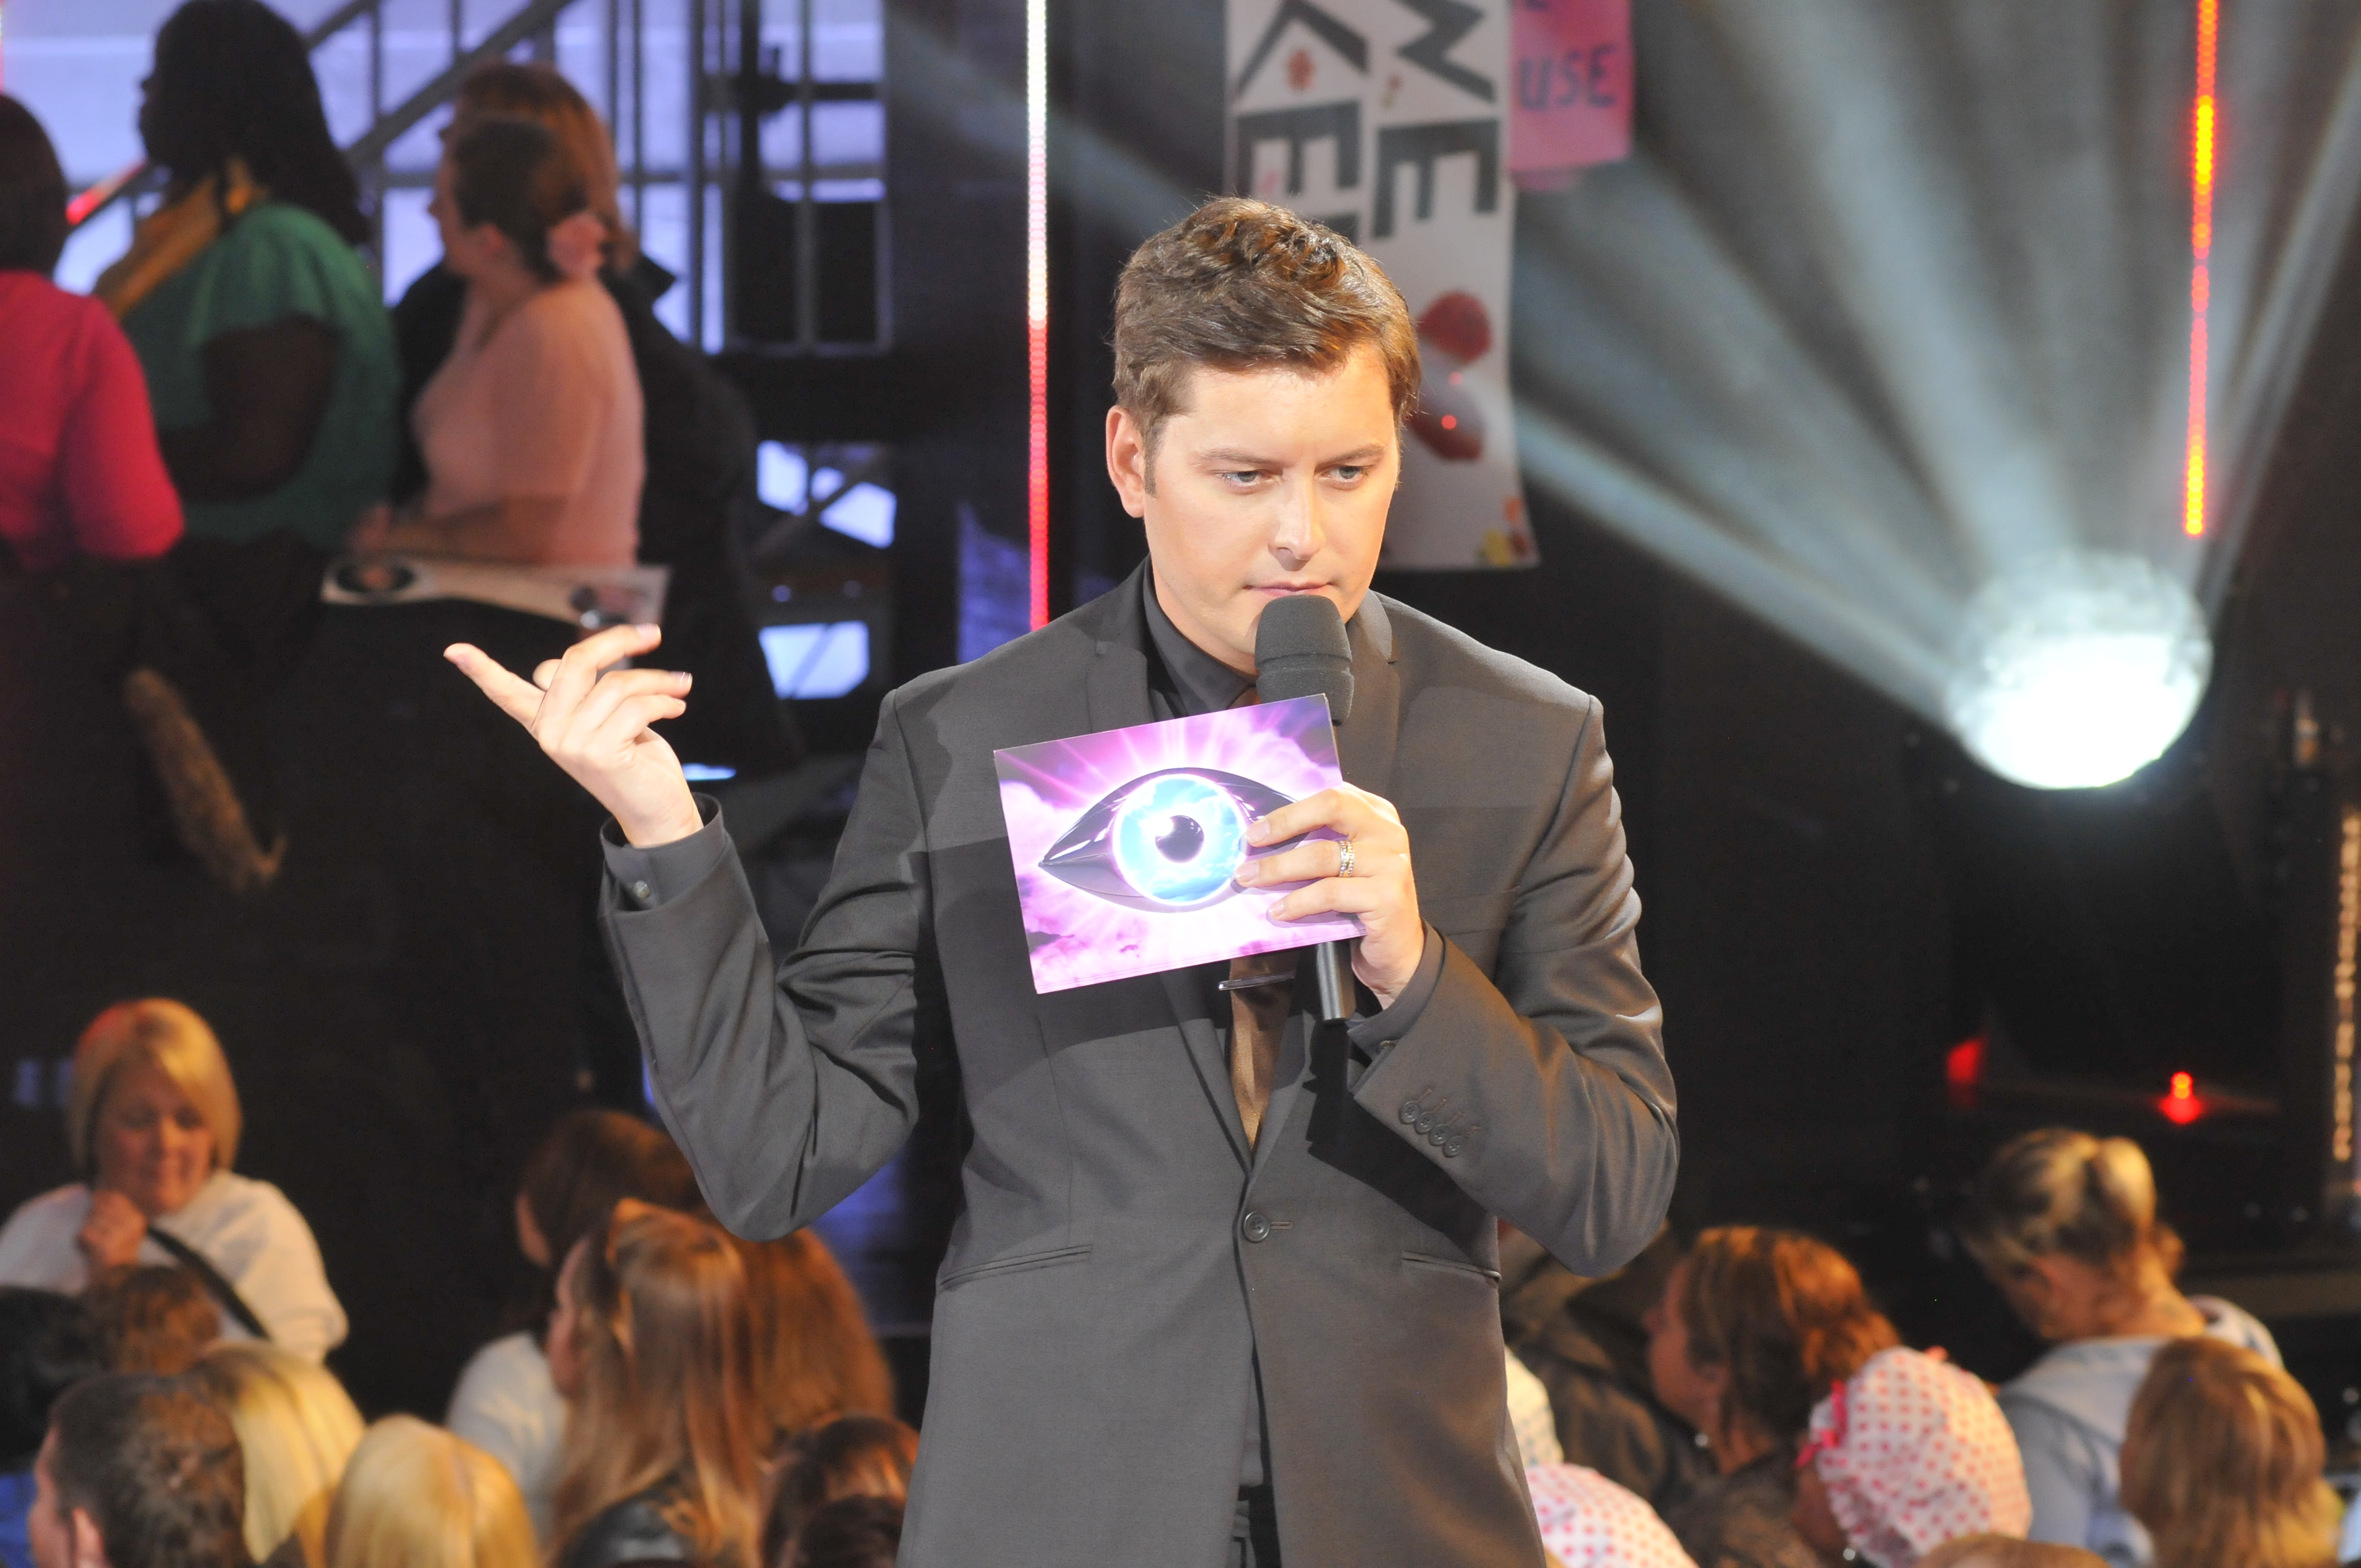 Day -7: “BB axe was embarrassing” says Brian Dowling